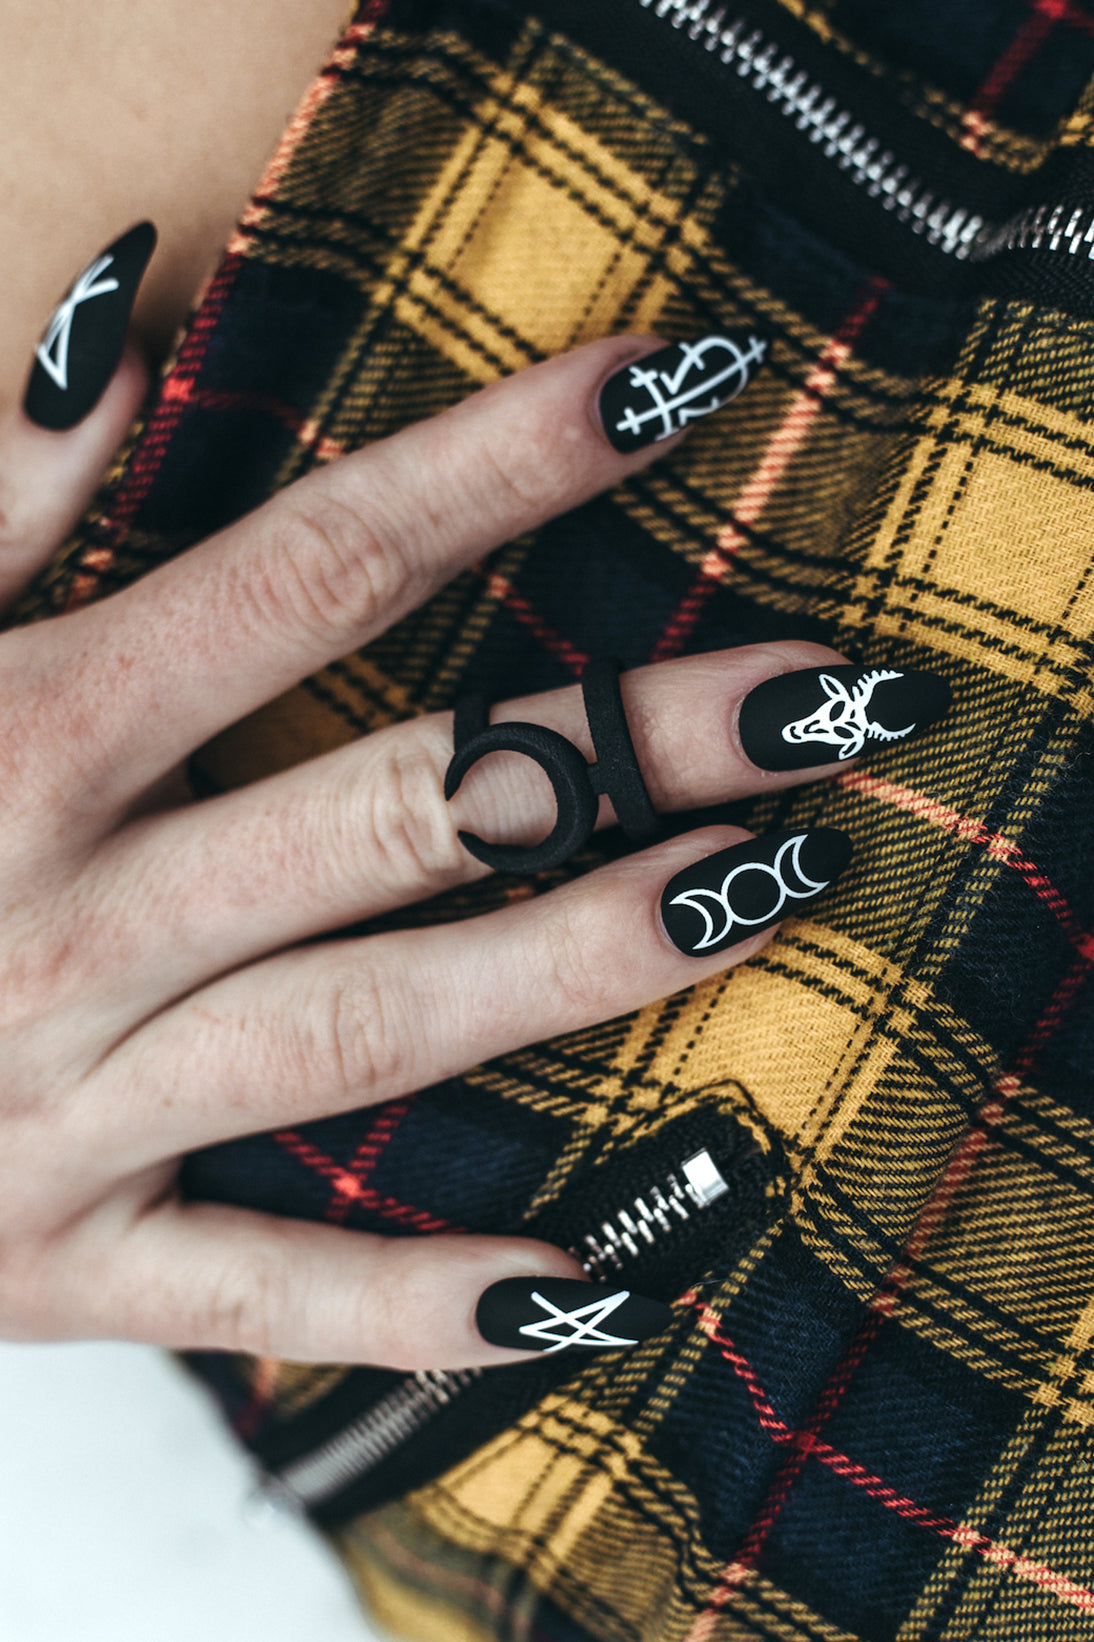 33 goth nail art ideas perfect for New Year's Eve | CafeMom.com